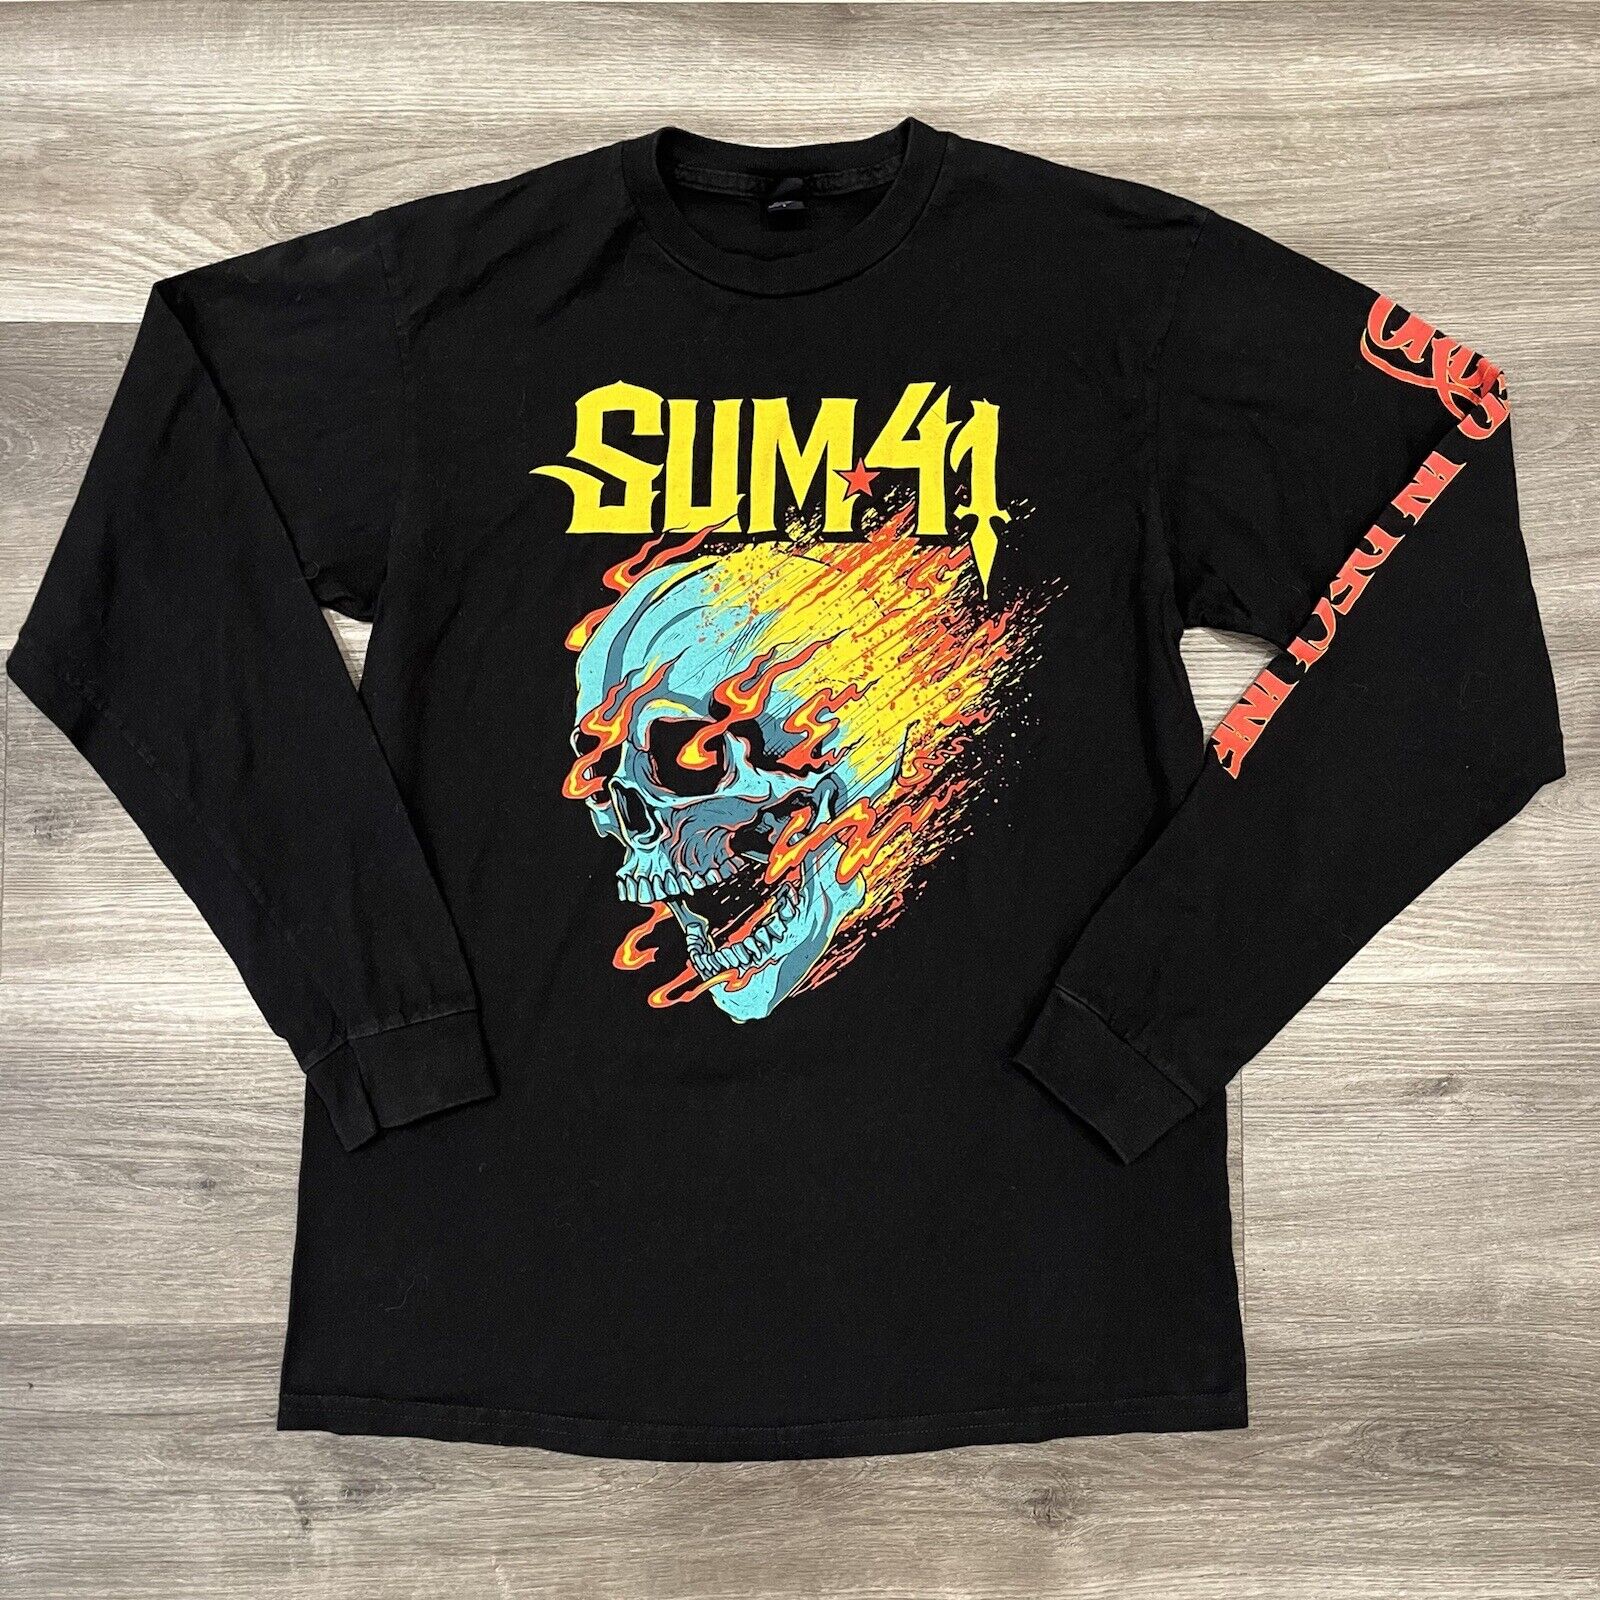 Sum 41 Order In Decline Us And Canada Tour Concert Shirt - Size: Large